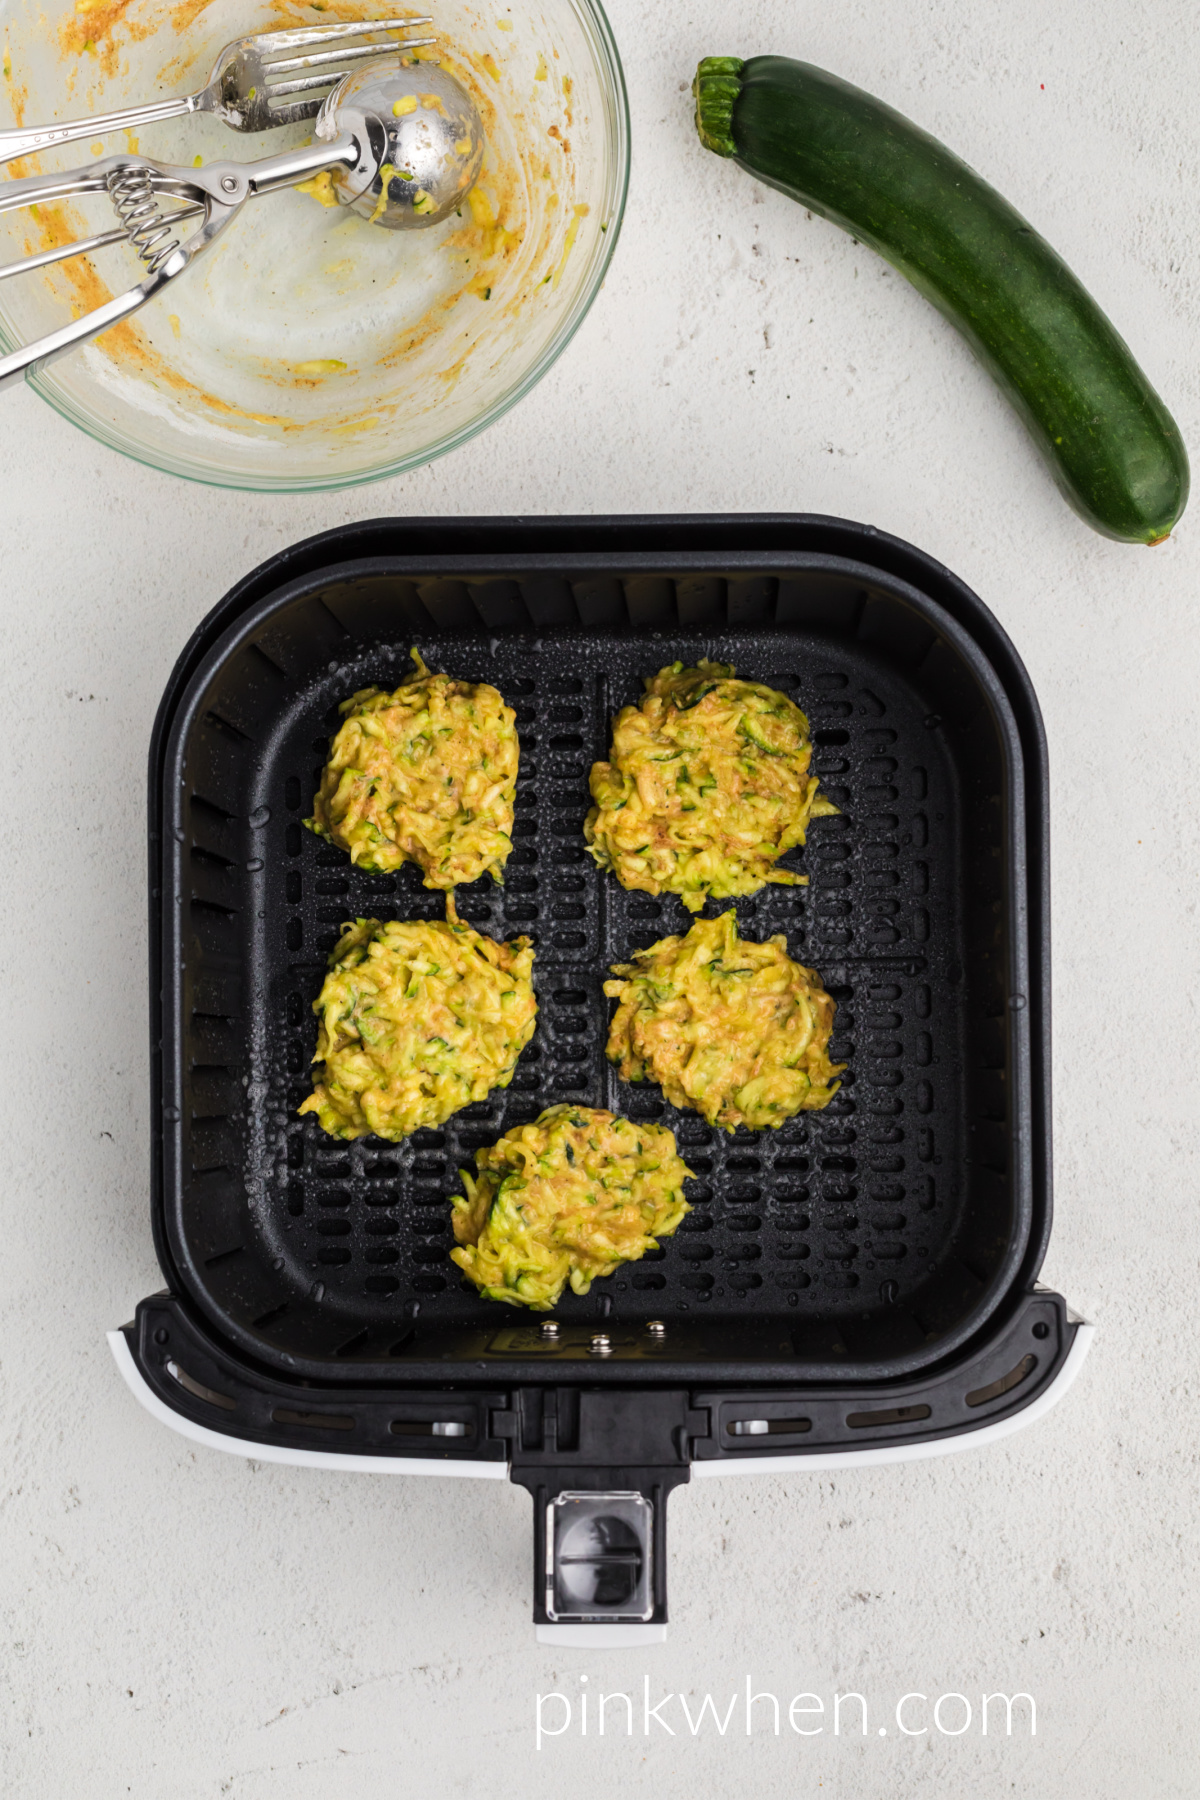 Zucchini mixture scooped onto the prepared air fryer basket, ready to cook.